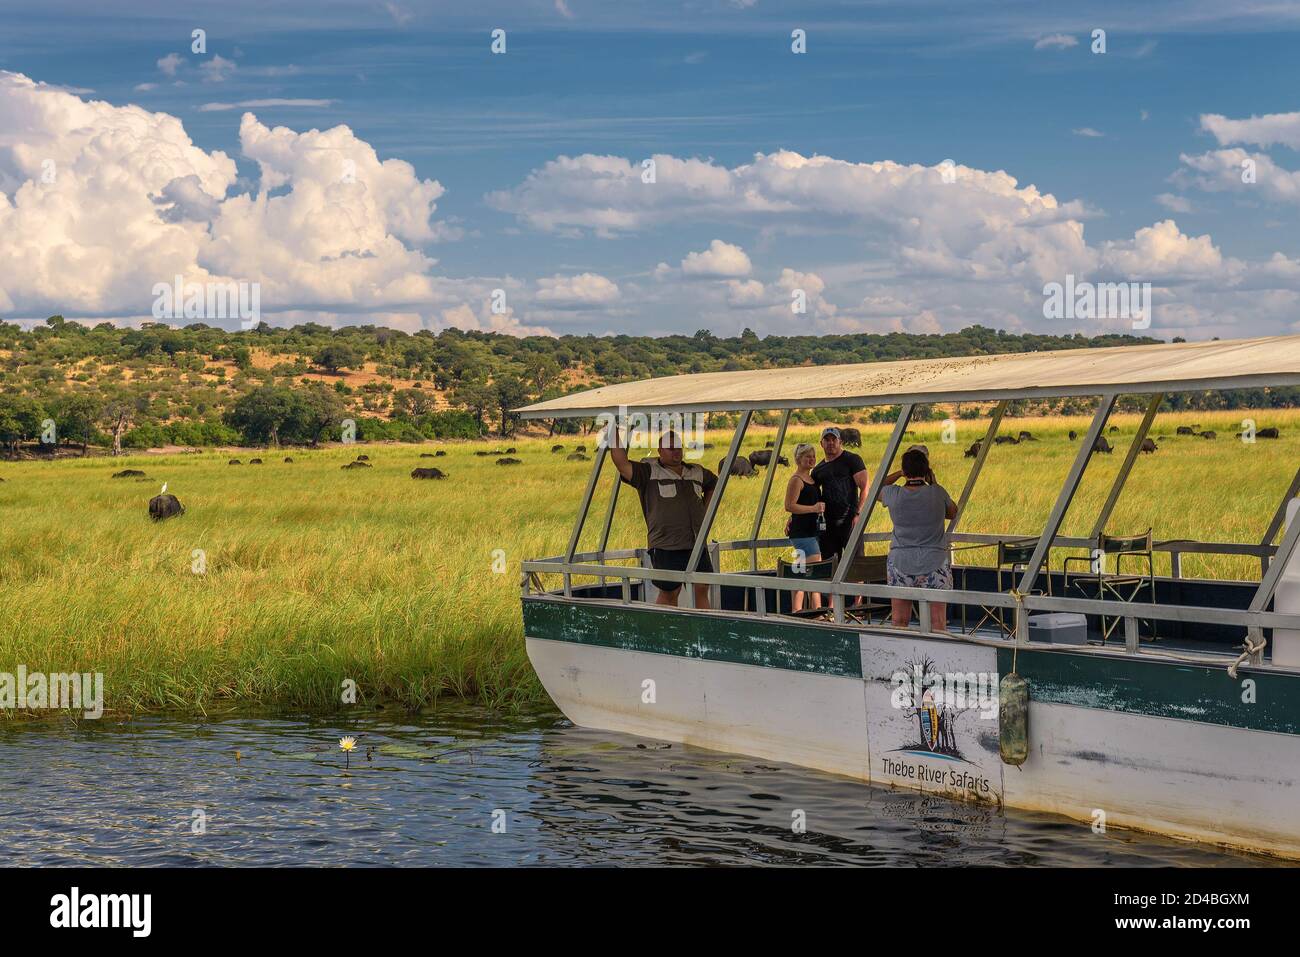 Tourists in a boat observe elephants along the Chobe River, Botswana, Africa Stock Photo